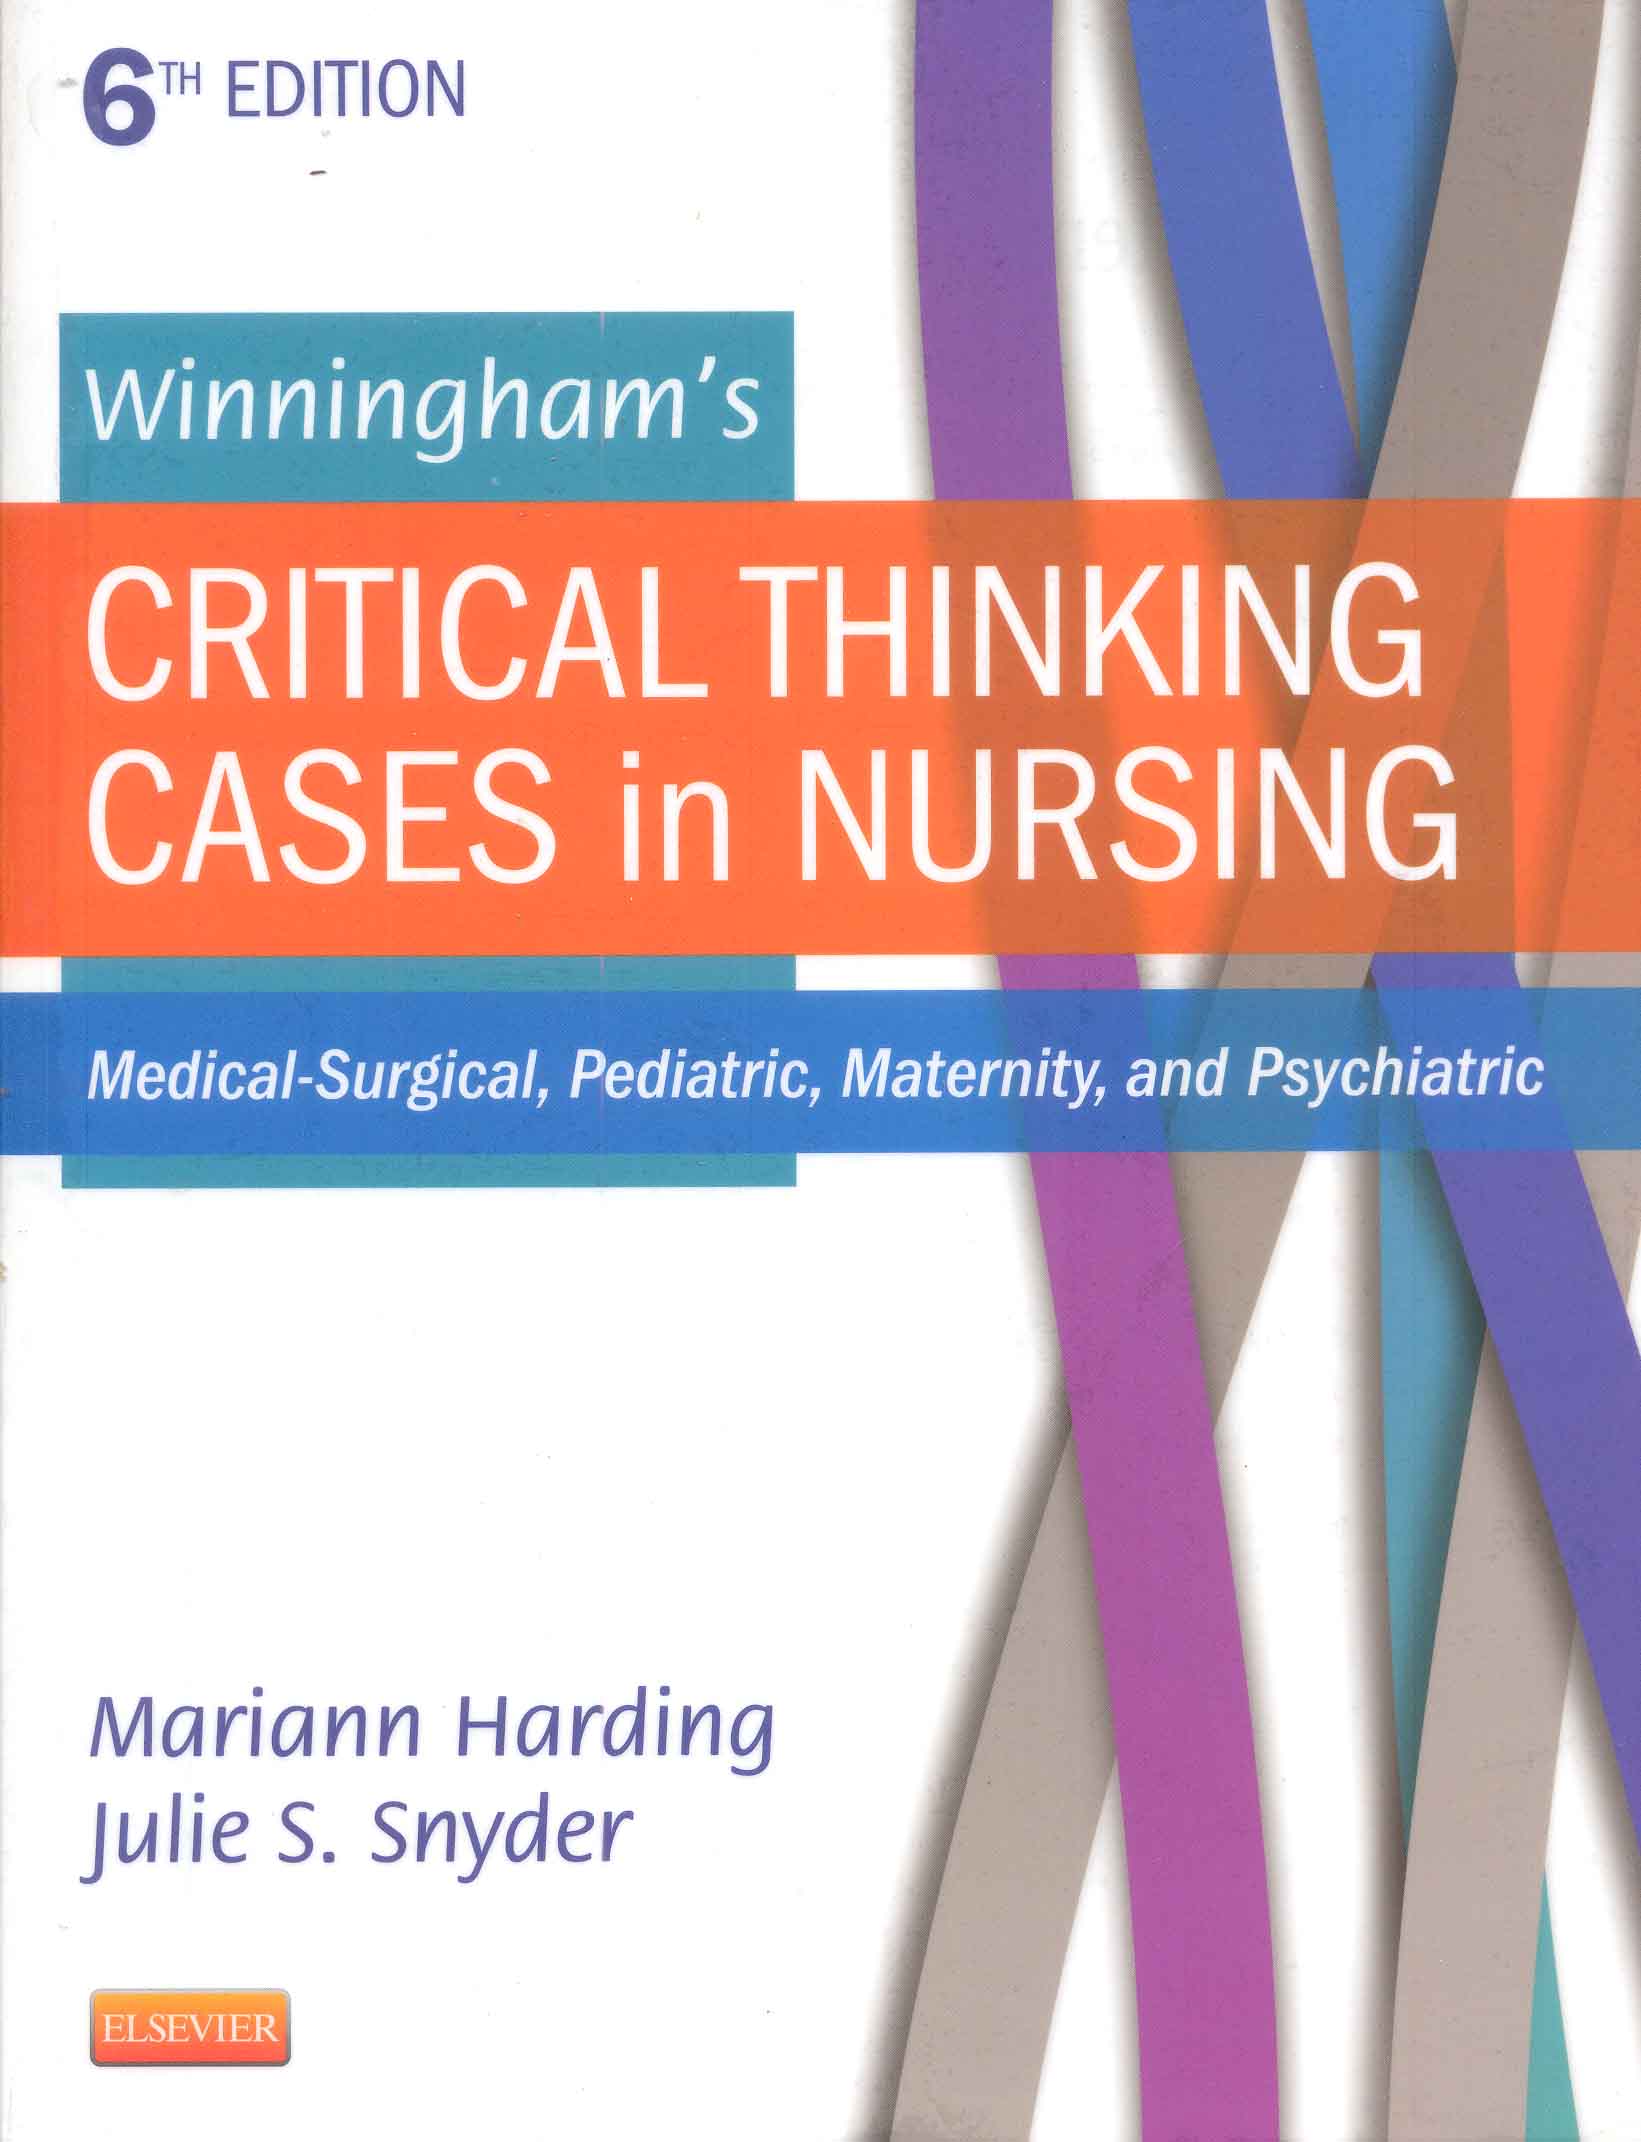 Winningham's critical thinking cases in nursing : medical - surgical, pediatric, maternity, and psychiatric